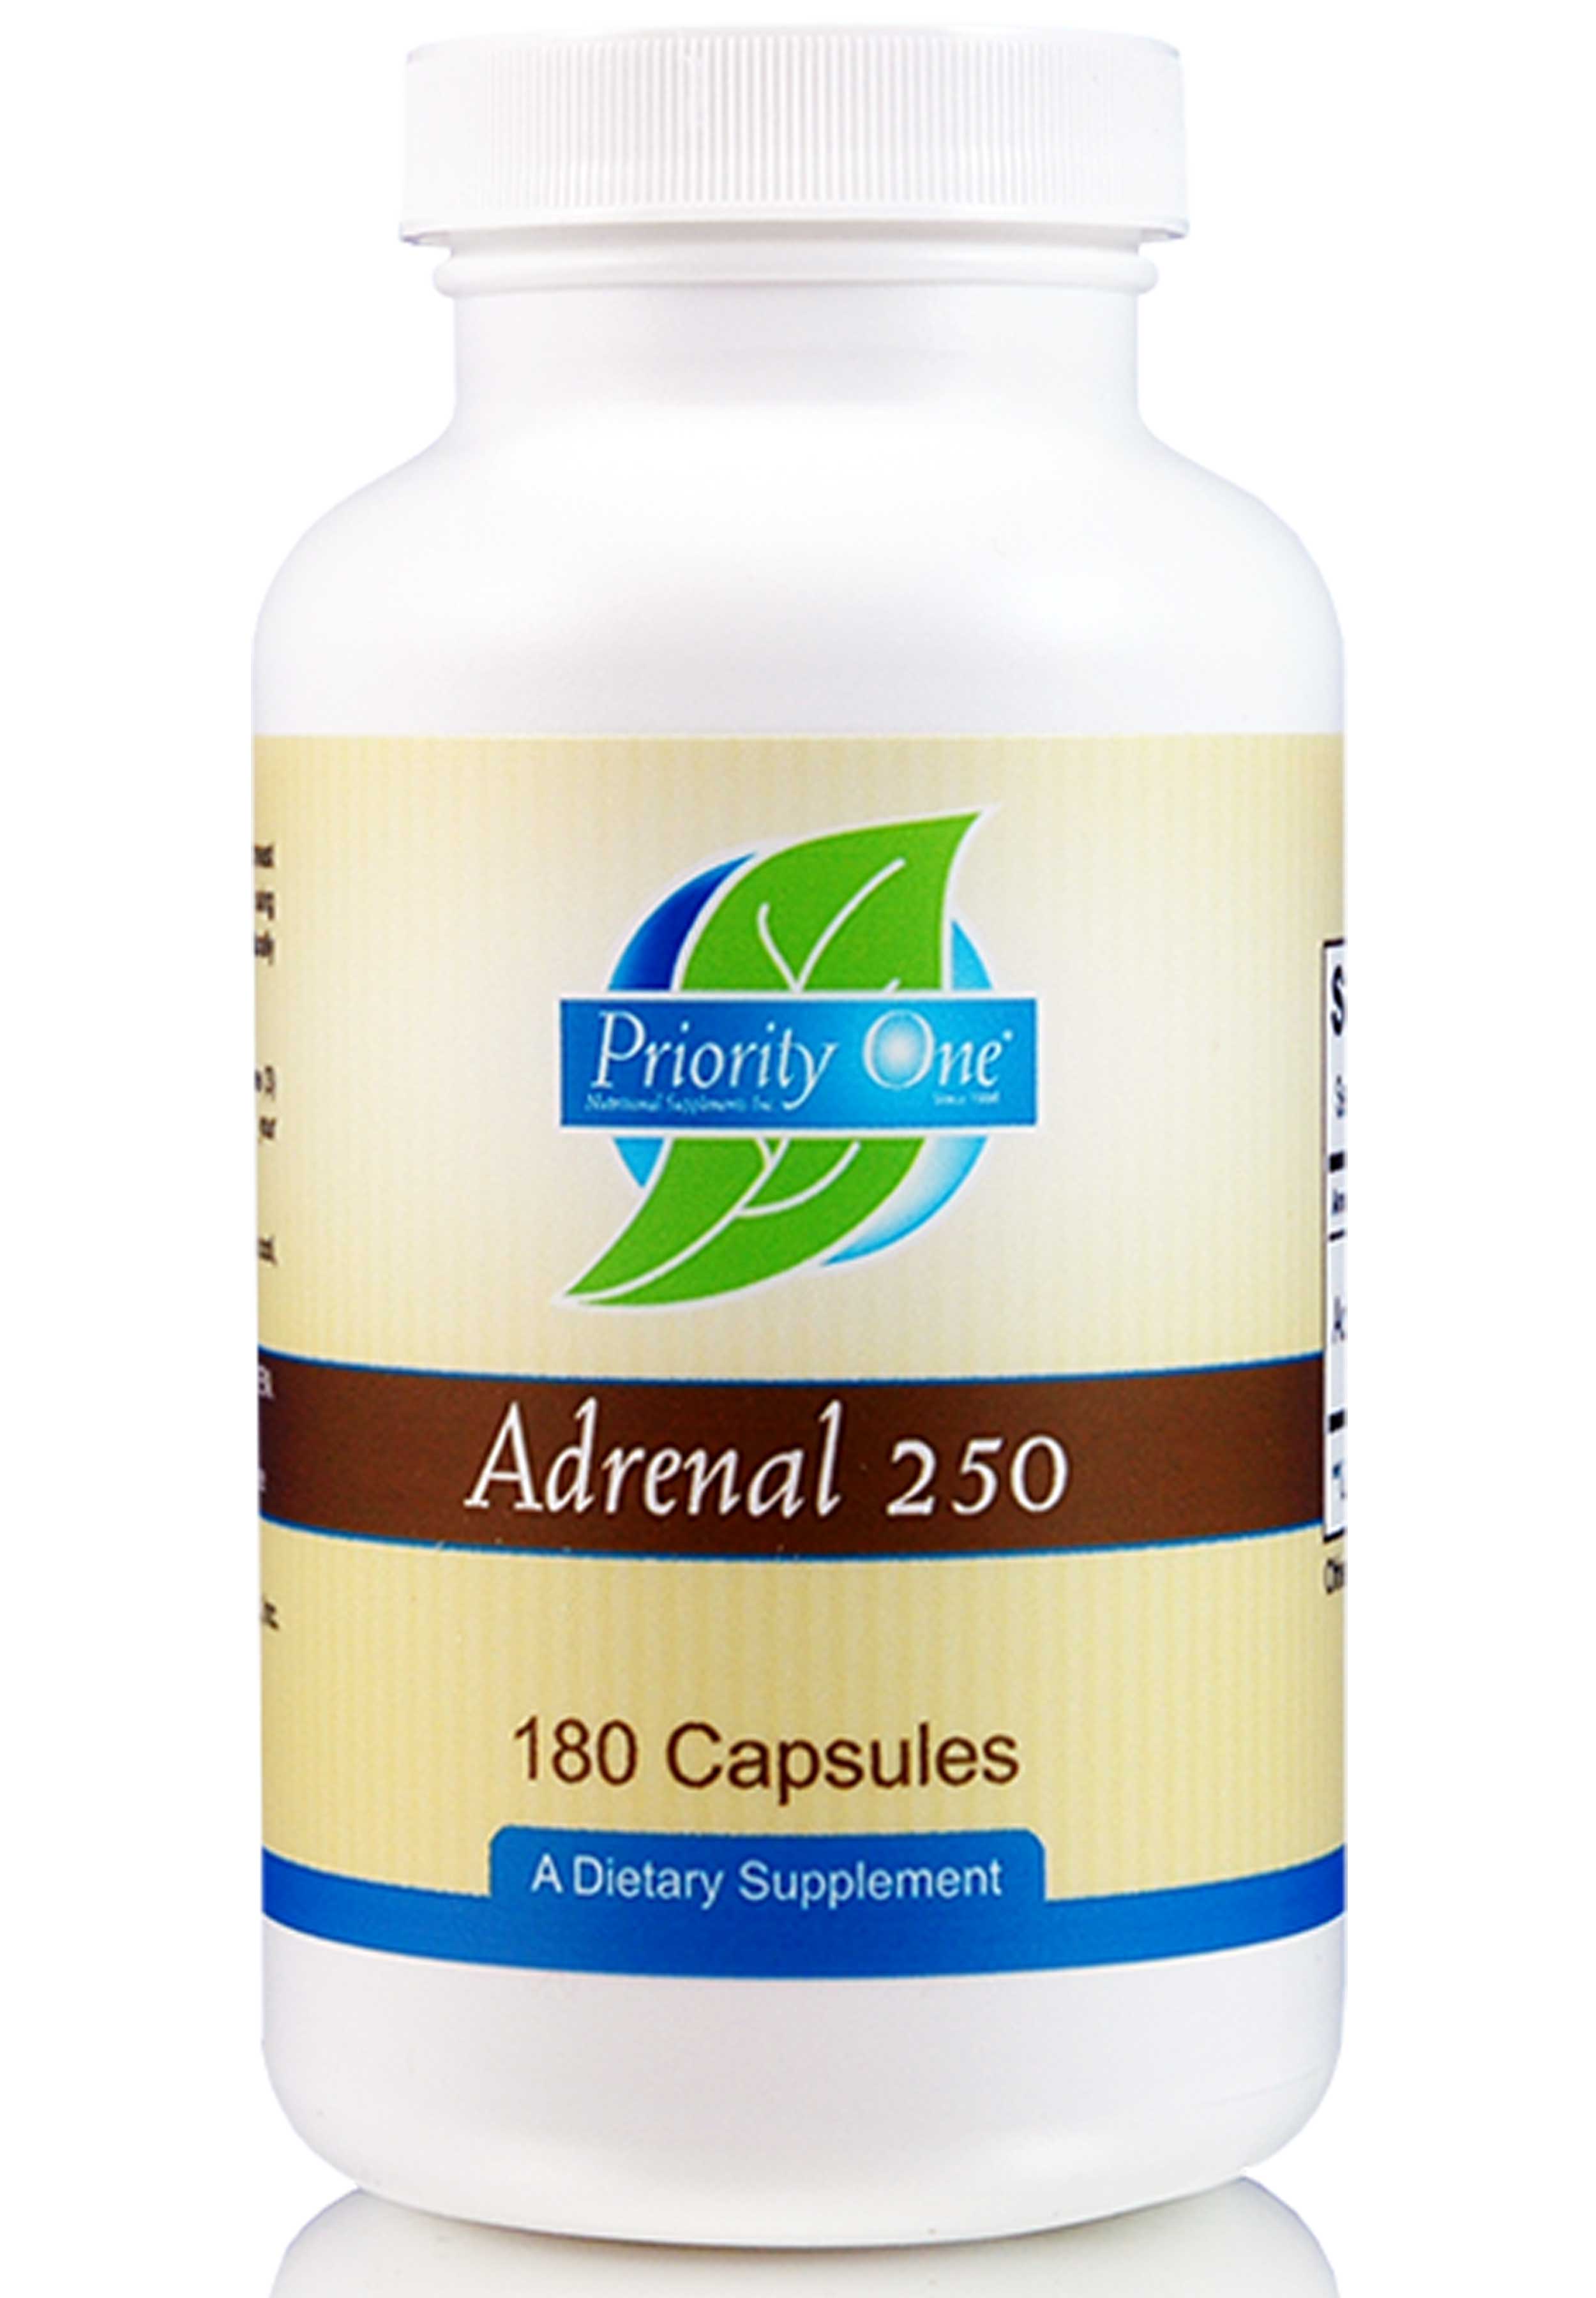 Priority One Adrenal 250